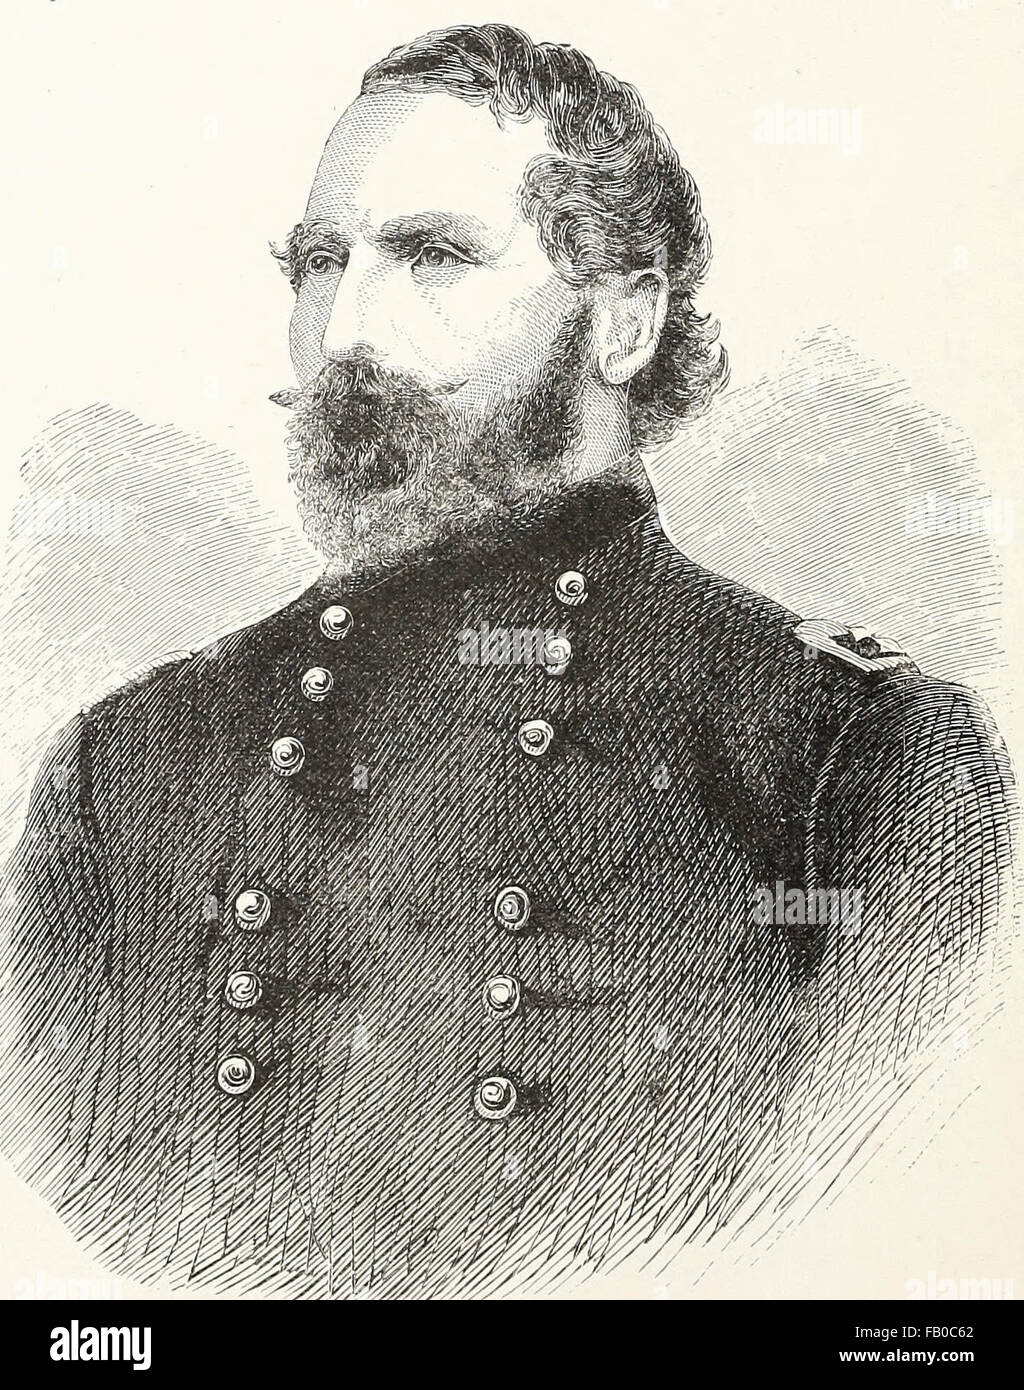 General John Sedgwick was a teacher, a career military officer, and a Union Army general in the American Civil War. He was the highest ranking Union casualty in the Civil War, killed by a sharpshooter at the Battle of Spotsylvania Court House, and is well-remembered for his ironic last words: 'They couldn't hit an elephant at this distance.' Stock Photo